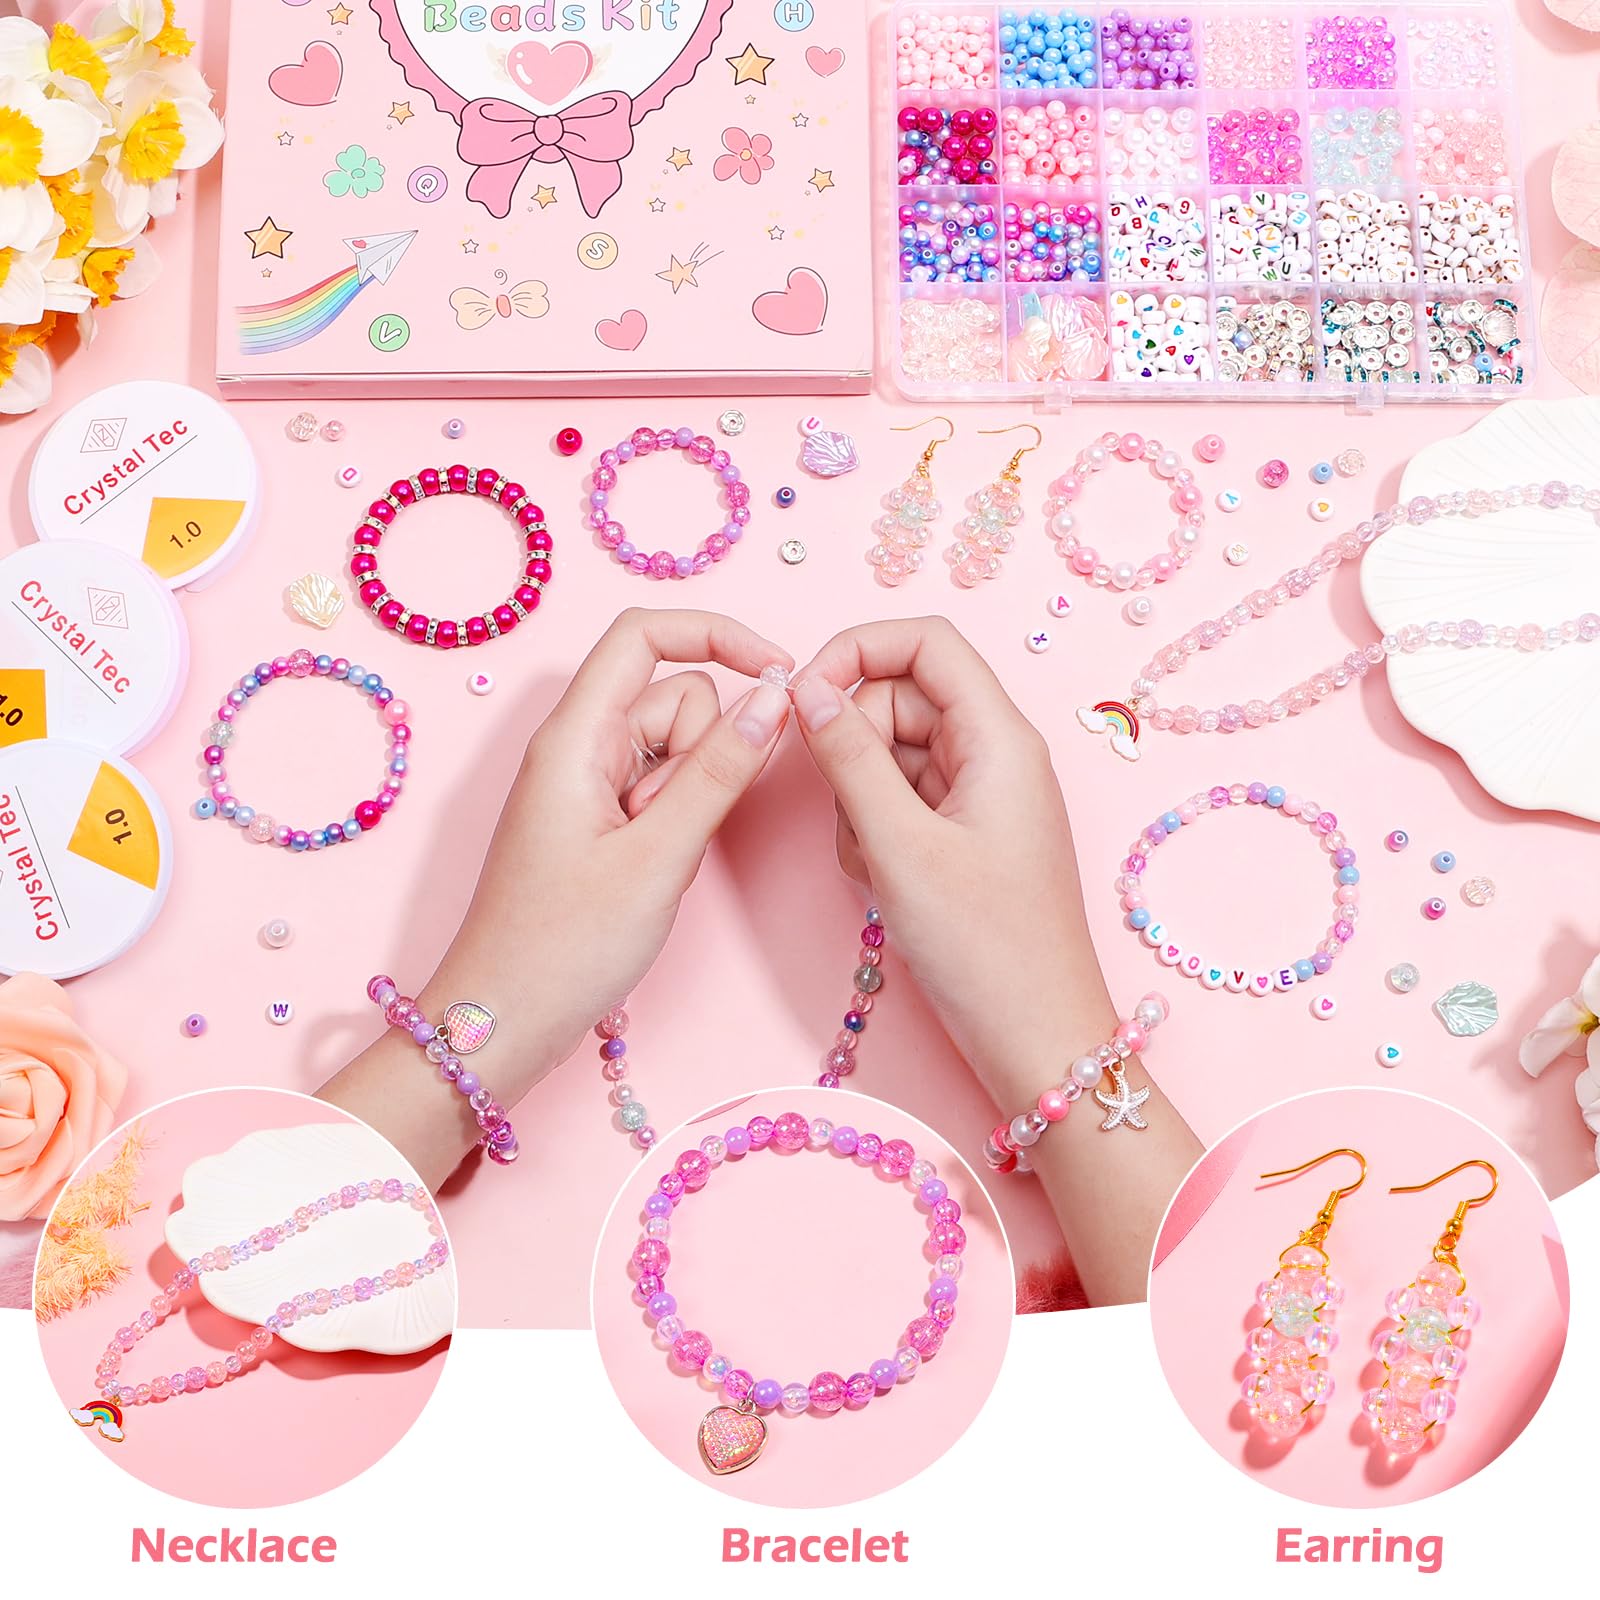 Qinzave 1074PCS Mermaid Bracelet Making Kit for Girls with Letter Beads,  Bracelet Making Kit for Girls with Assorted Sizes 6mm 8mm, Mermaid Charm  DIY